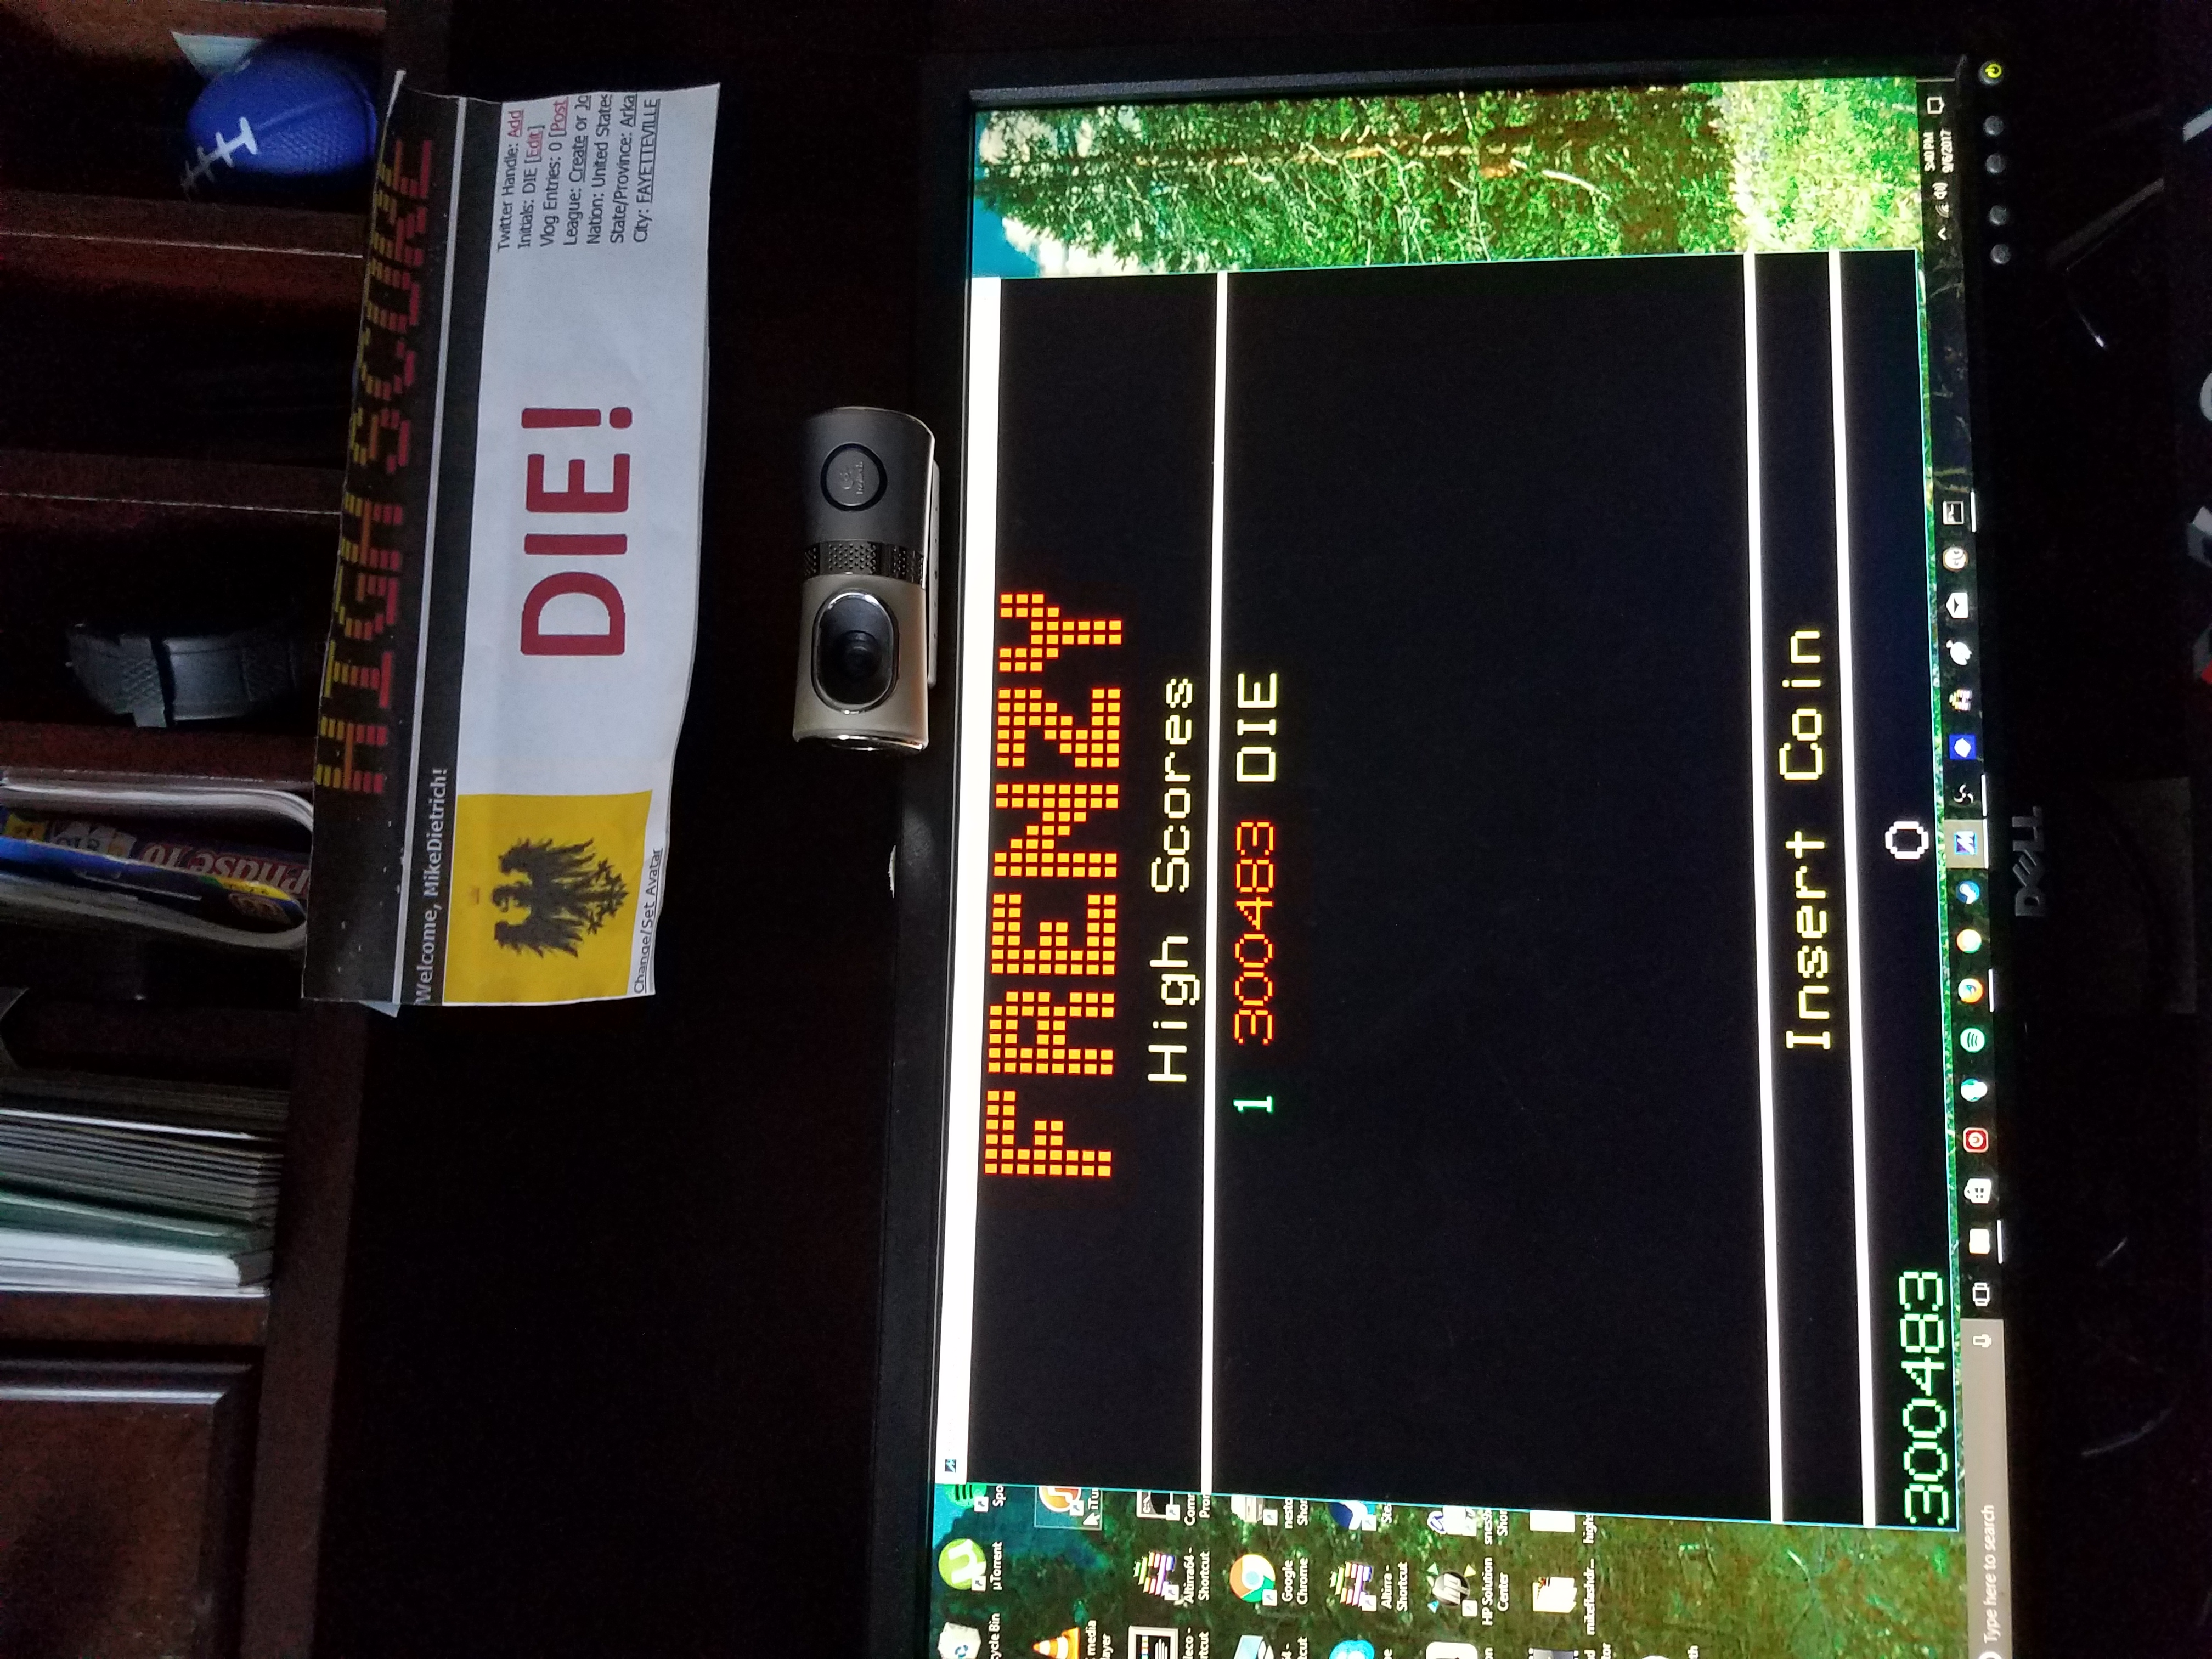 MikeDietrich: Frenzy (Arcade Emulated / M.A.M.E.) 300,483 points on 2017-09-06 19:26:21